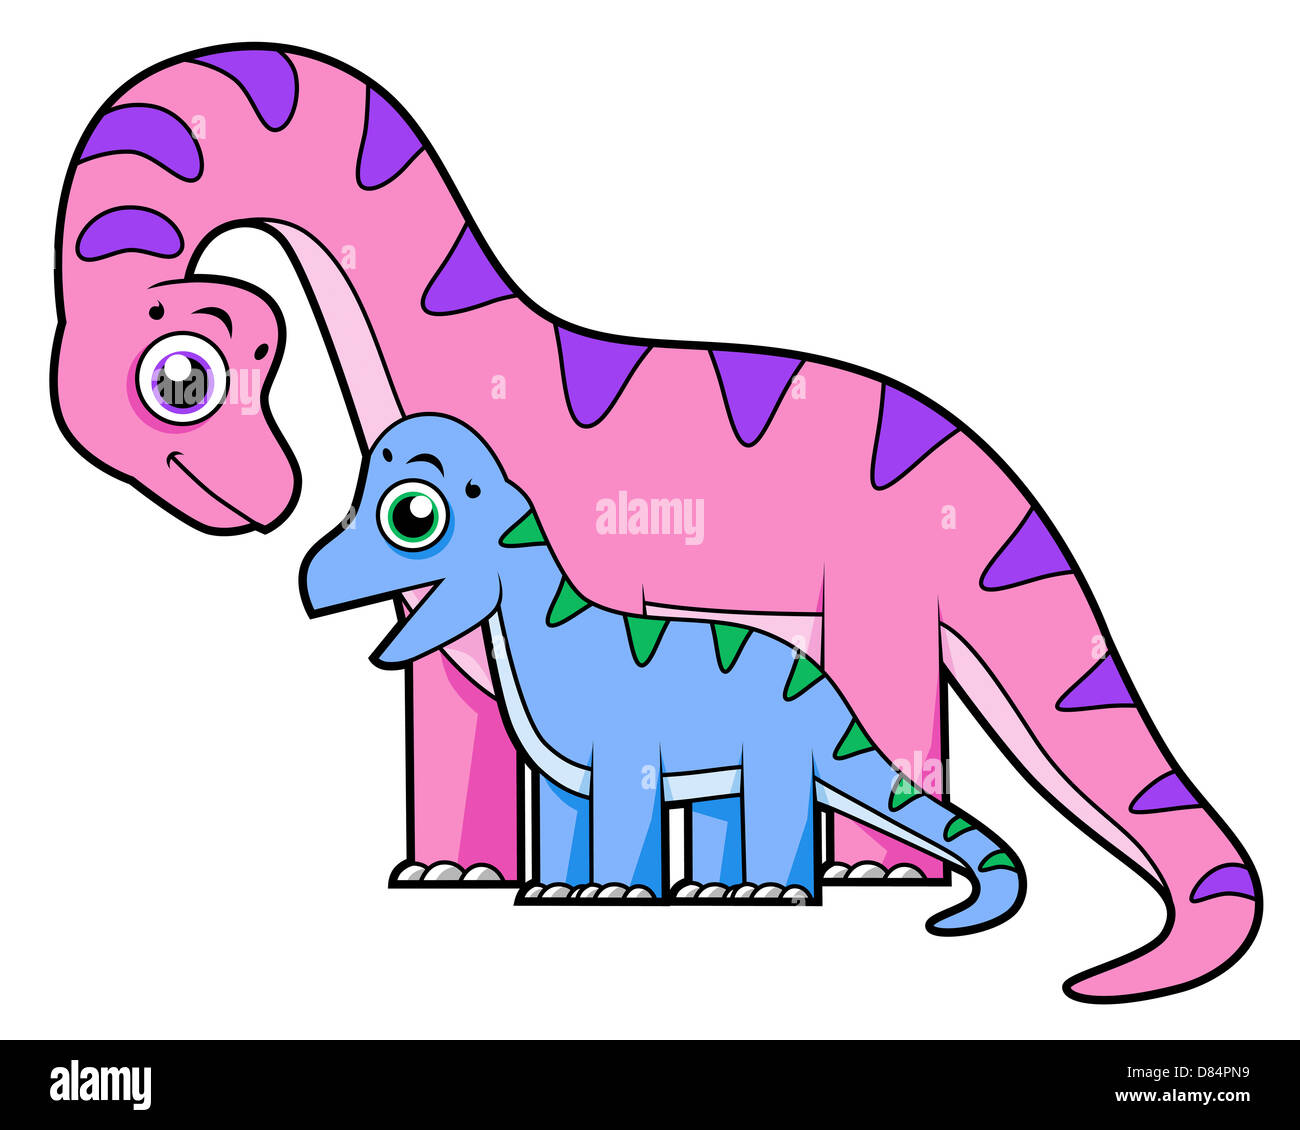 Cute illustration of a mother and child Brachiosaurus. Stock Photo